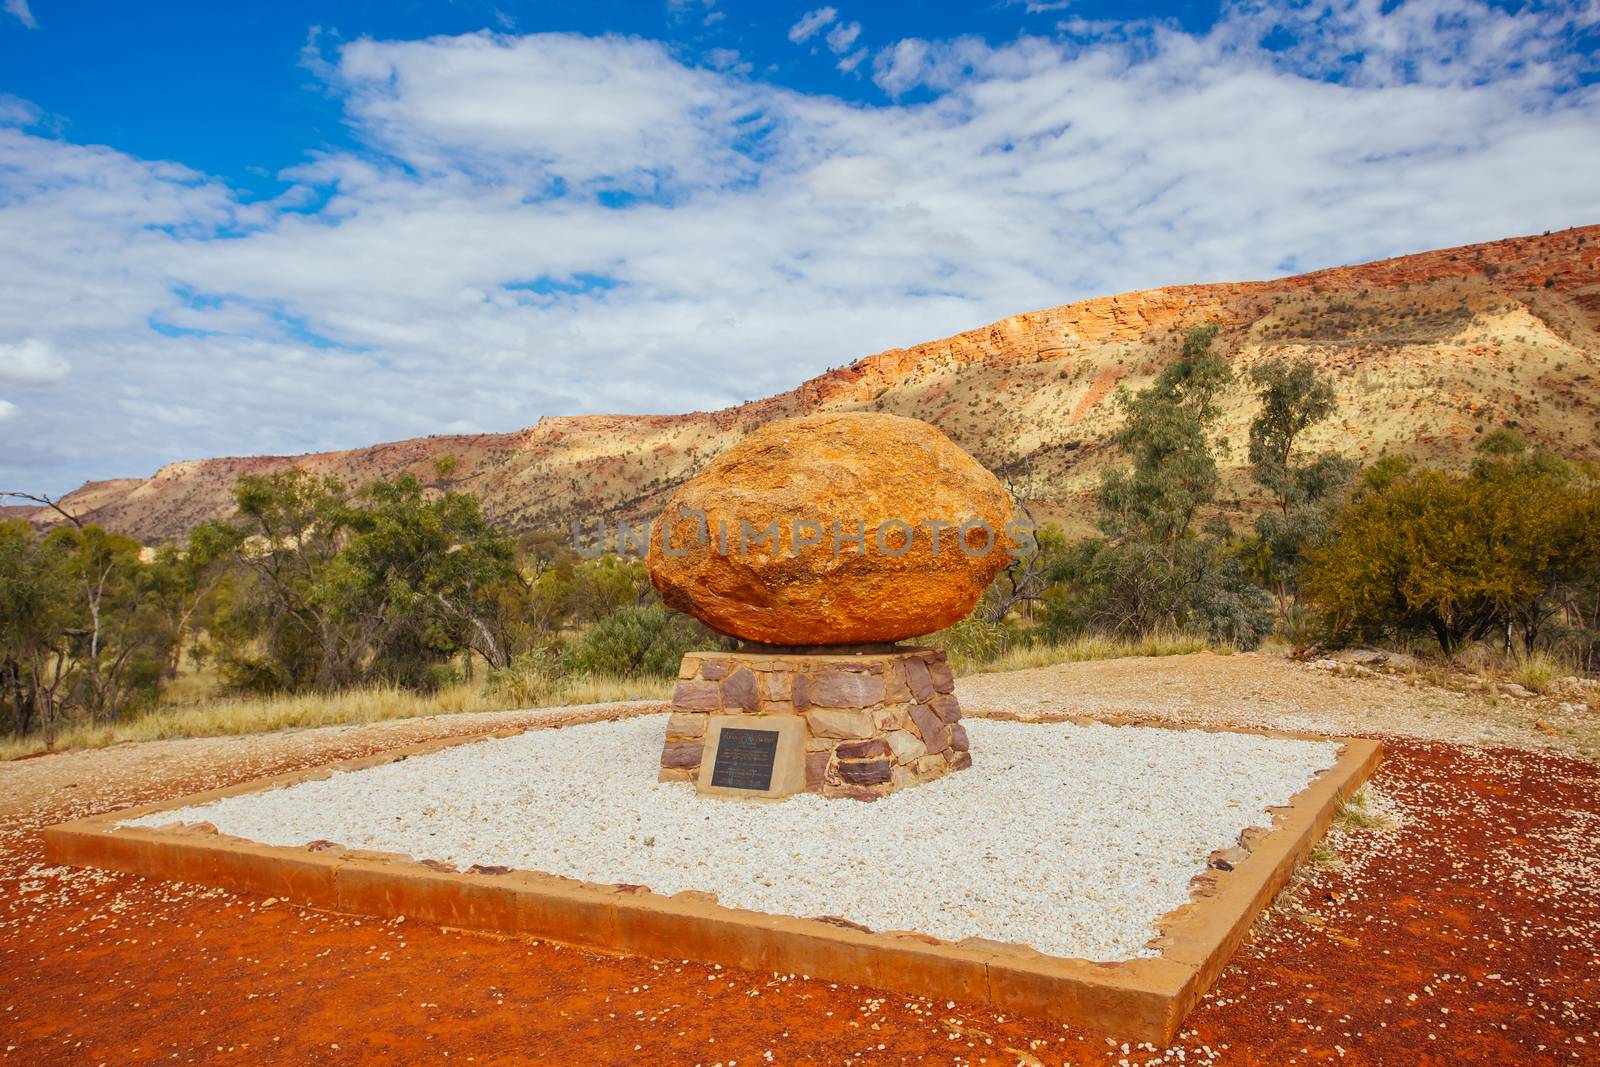 The final resting place of Flynn of the Inland, founder of the Flying Doctor Service, near Alice Springs, Northern Territory, Australia